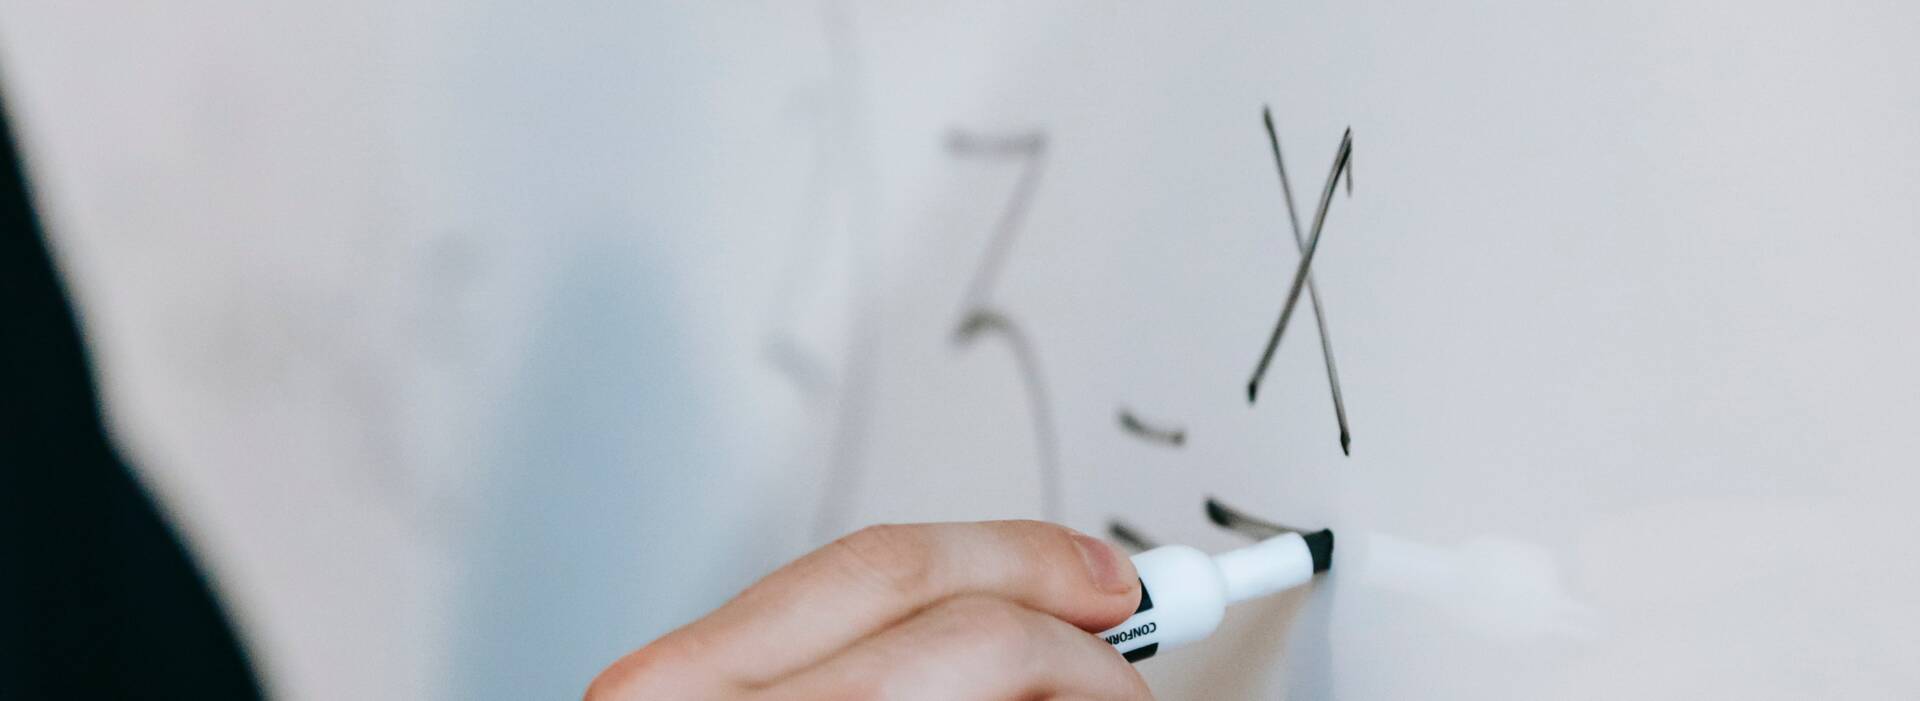 Person writing calculus on a whiteboard with a black marker